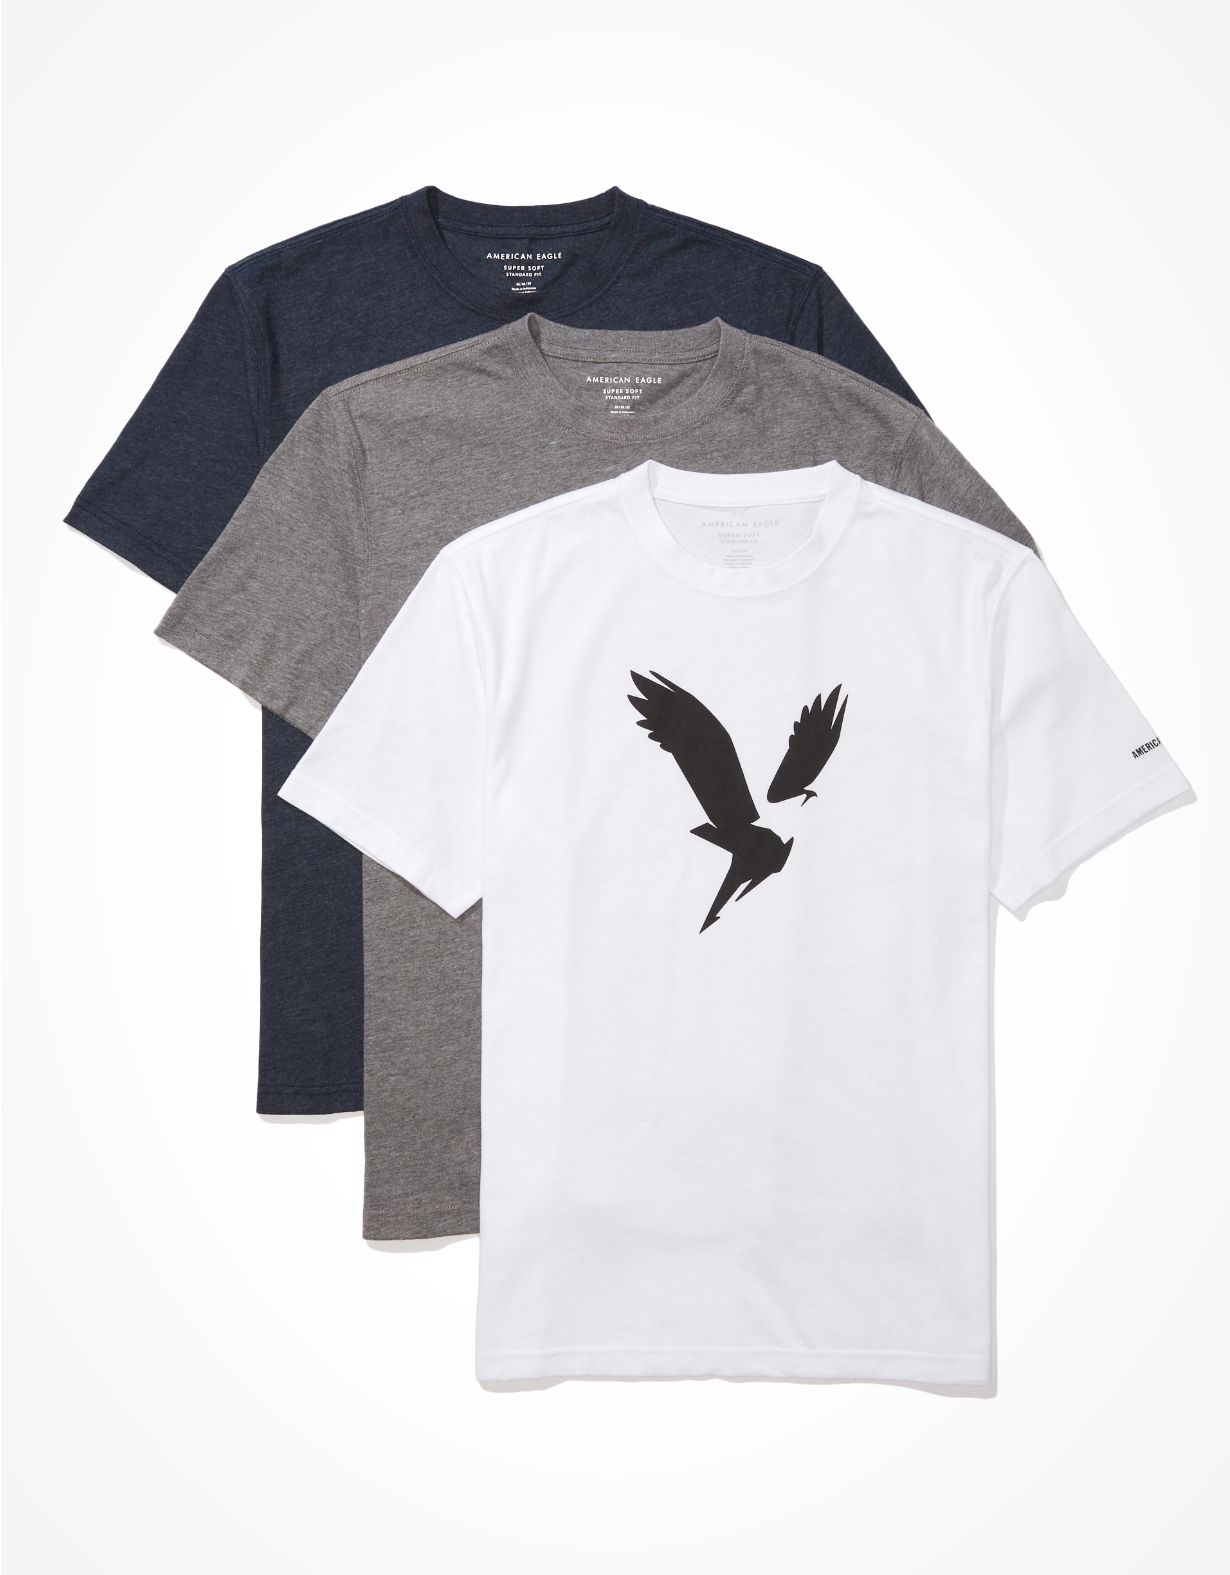 AE Super Soft Graphic T-Shirts 3-Pack